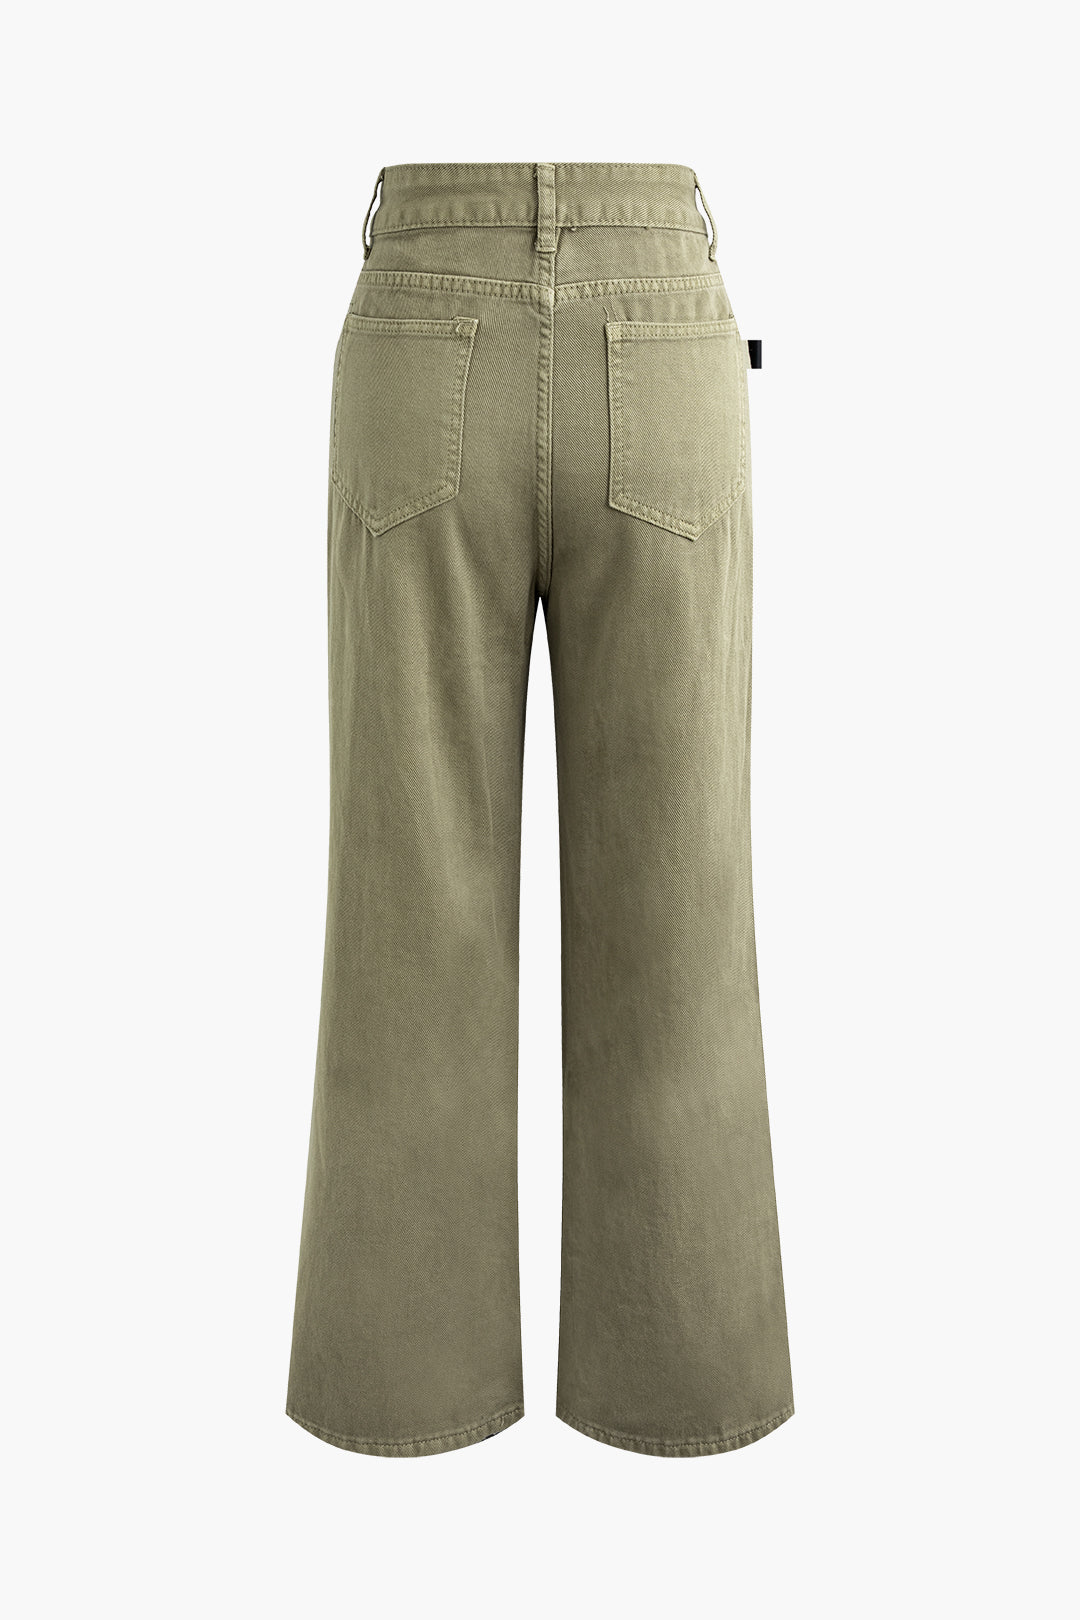 Dirty Stained Pocket Straight Leg Pants